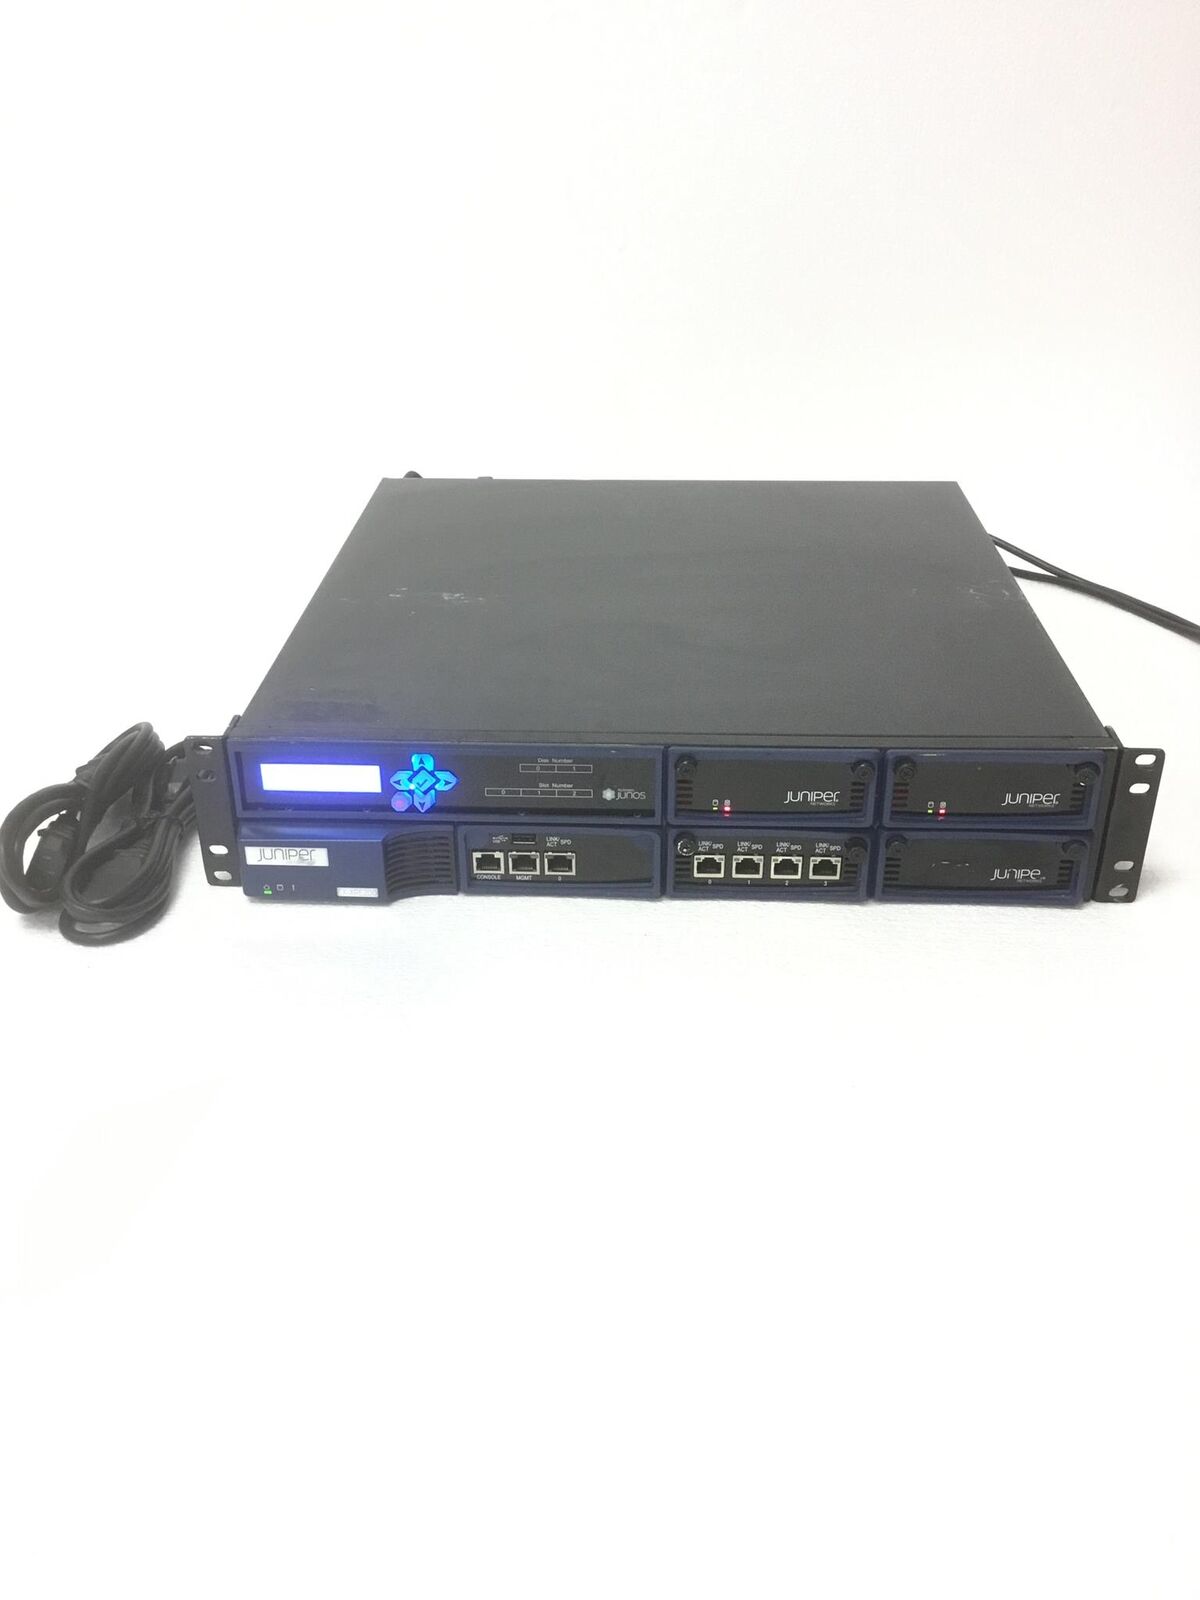 JUNIPER EX-XRE200 Virtual Chassis External Routing Engine w/2xPS Rack Ears WORKS